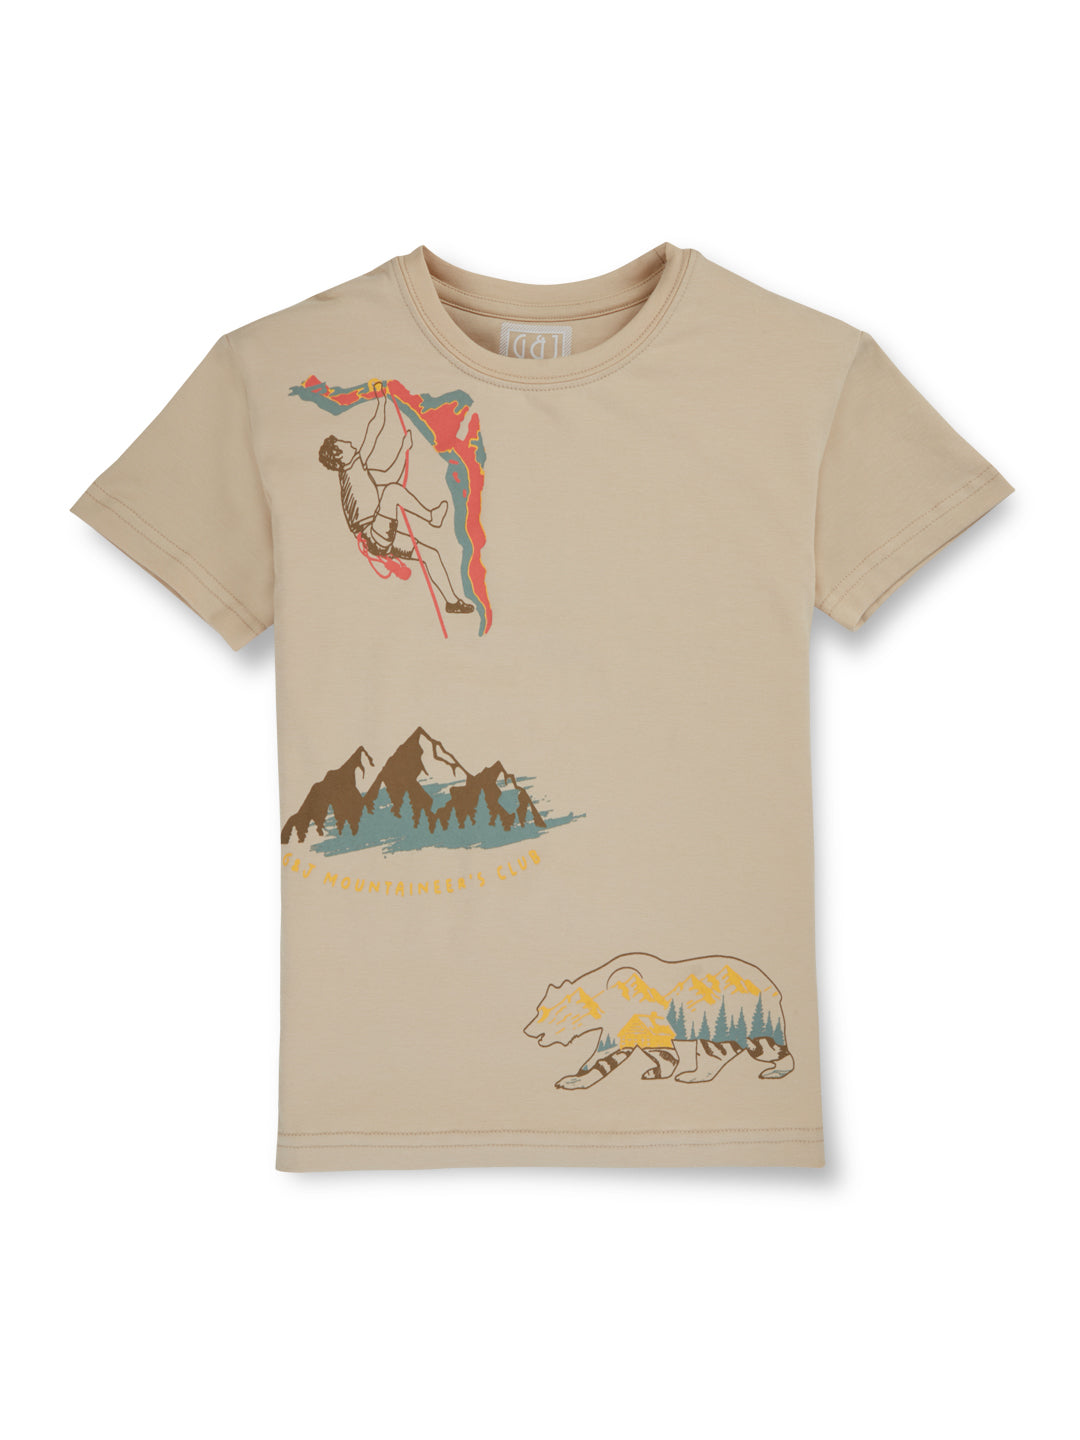 Boys Brown Solid Cotton Half Sleeves T-Shirt